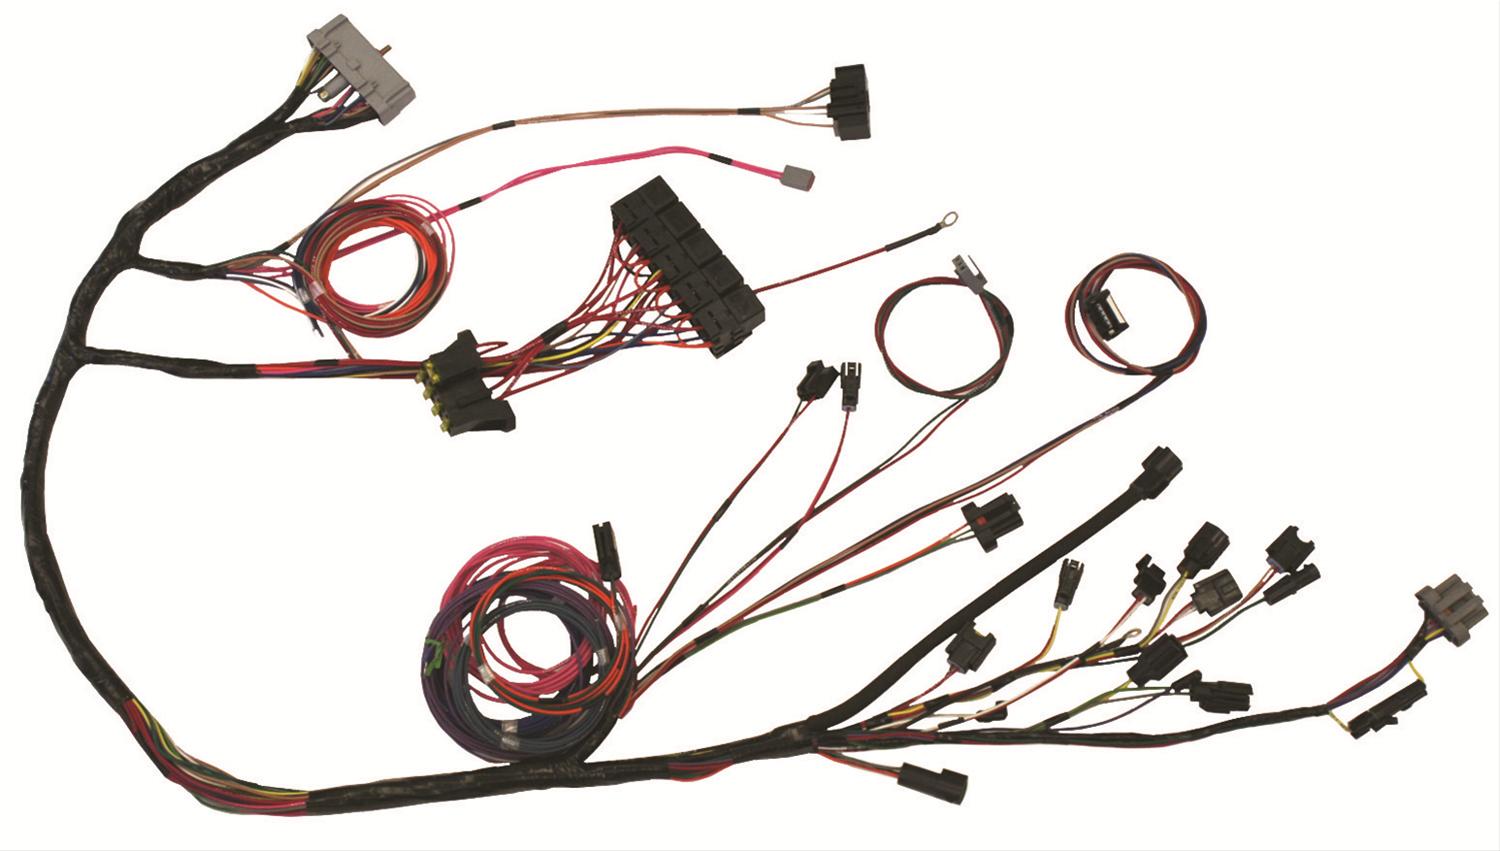 Ron Francis Wiring Mg65 The Detail Zone, Ron Francis Wiring Harness Instructions Pdf